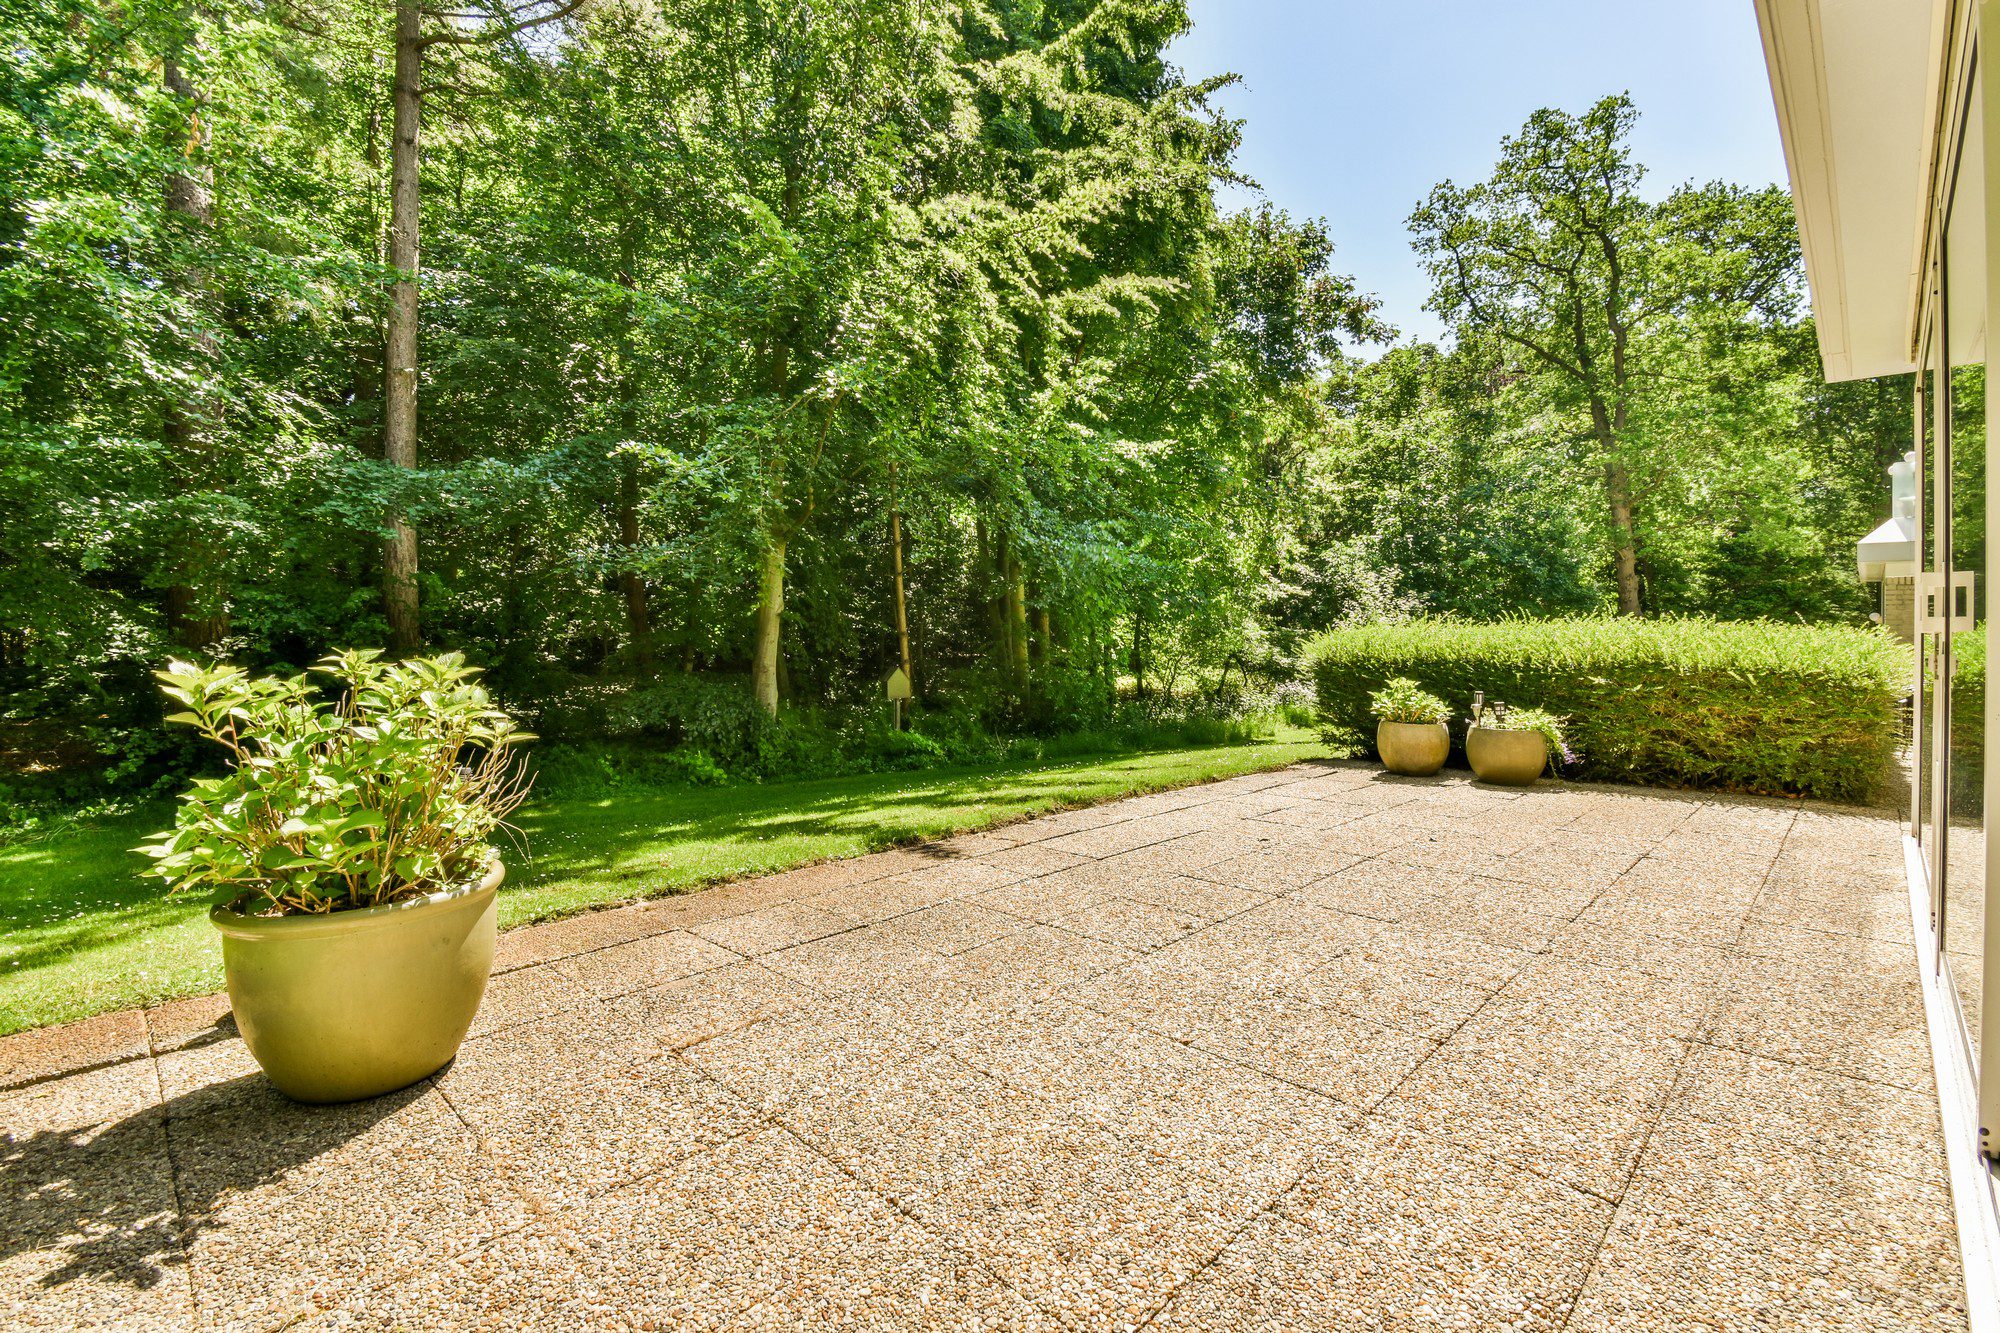 This image shows a well-maintained outdoor patio area adjoining to a house. The patio floor is covered with what looks to be a textured paving material that might provide a non-slip surface. On the patio, there's a large planter with a verdant shrub or plant. This planter is placed near the viewer's perspective.Beyond the patio area, we see a manicured lawn surrounded by a variety of trees, creating a peaceful and serene woodland backdrop. The lush green foliage indicates that the picture is taken during a time of year when plants are in full leaf, likely spring or summer. To the right, near the corner of the house, there's a hedge and two large matching planters, and visible through the trees is a part of what seems to be a fence, suggesting this is a private residential space.The light and shadows indicate it's a sunny day, with sunlight filtering through the trees, creating a bright and warm atmosphere in the garden. The angle of the shot and the inclusion of a portion of the building suggest it might have been taken for real estate or landscaping design purposes.